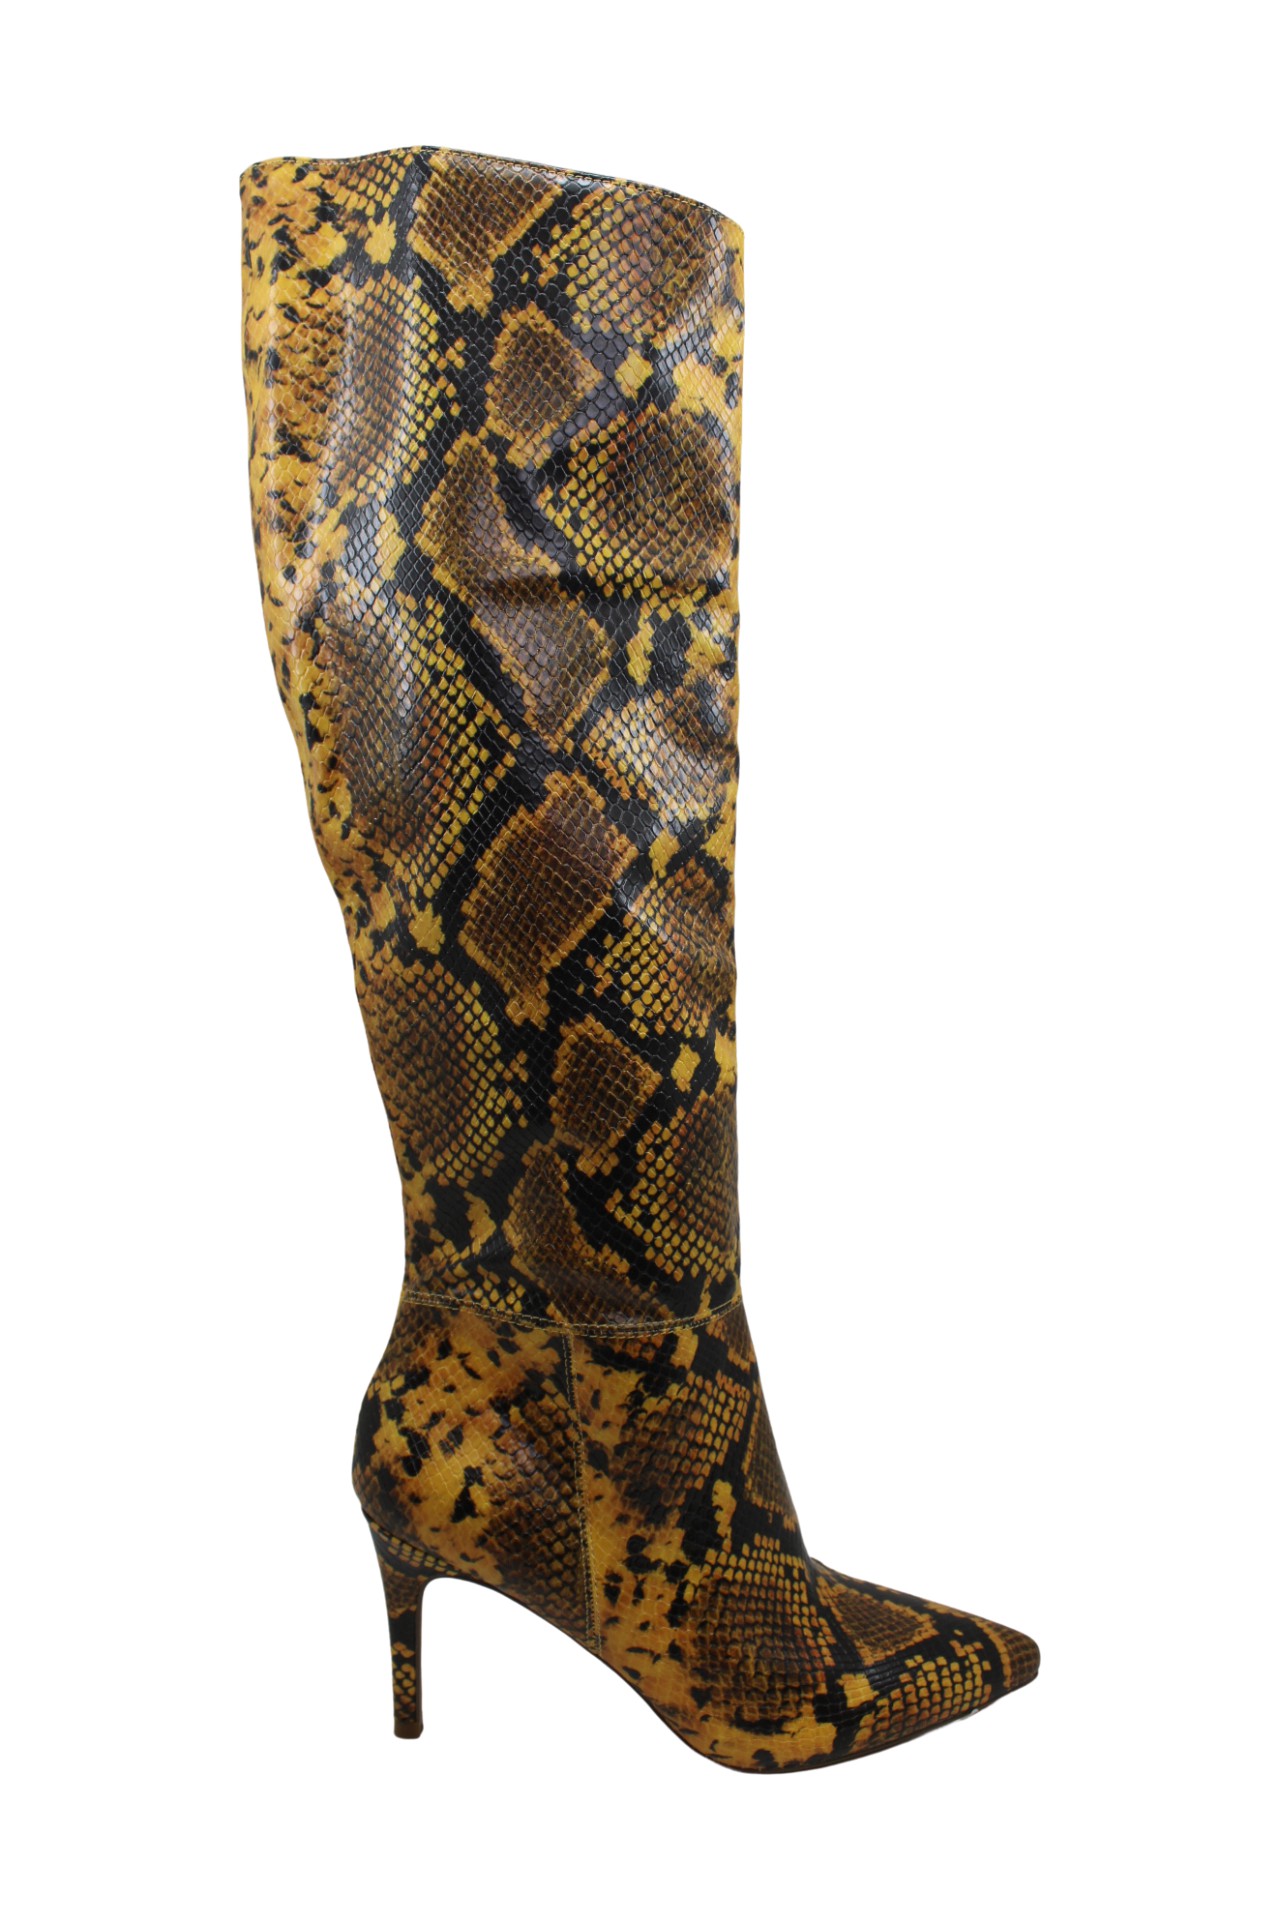 Steve Madden Women's Shoes Kimari slouch boot Pointed, Yellow Snake